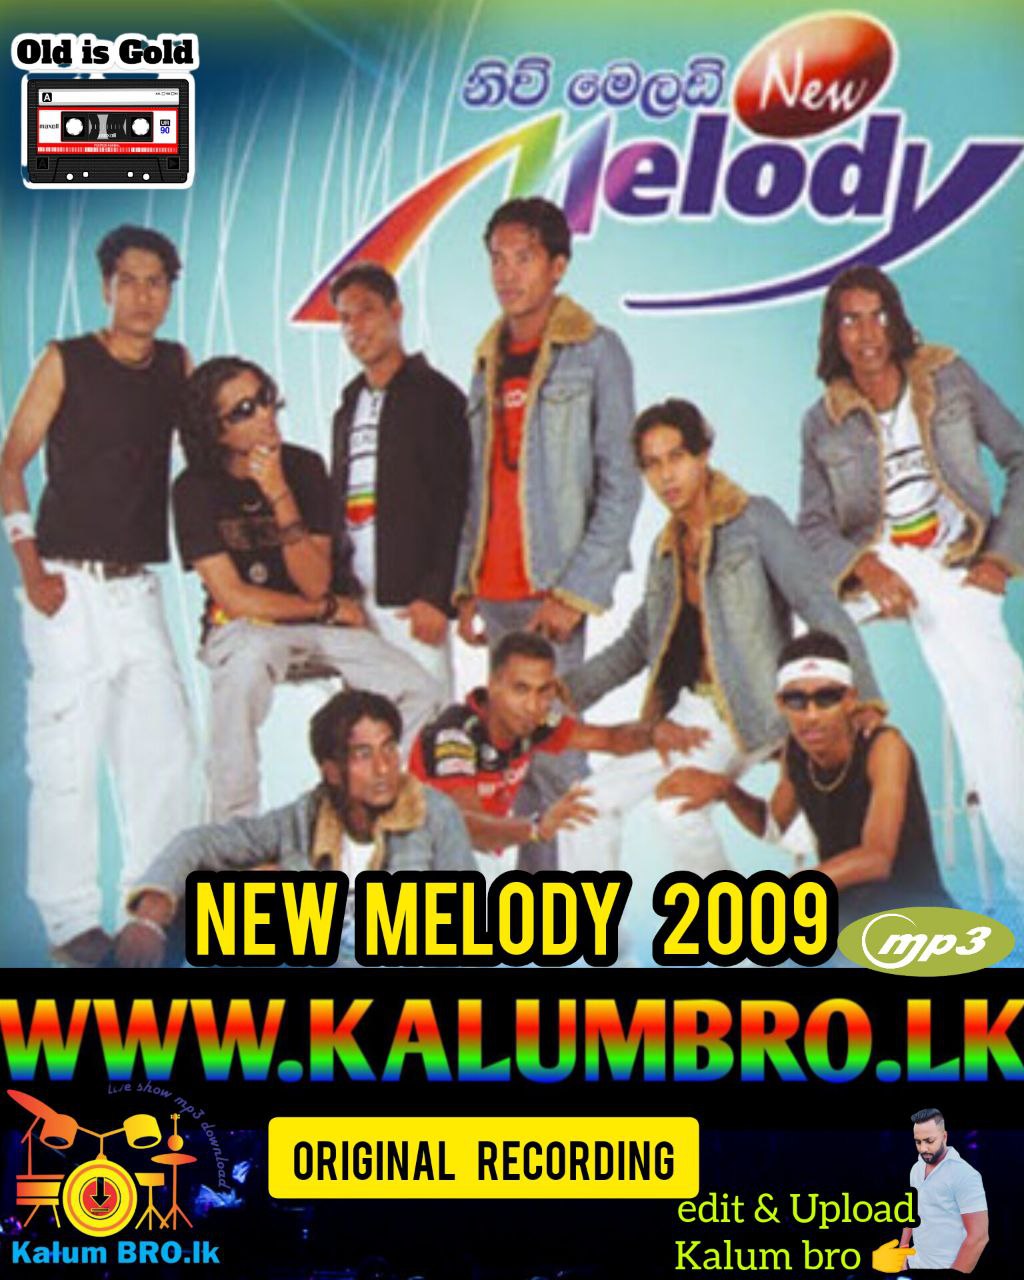 NEW MELODY LIVE SHOW 2009